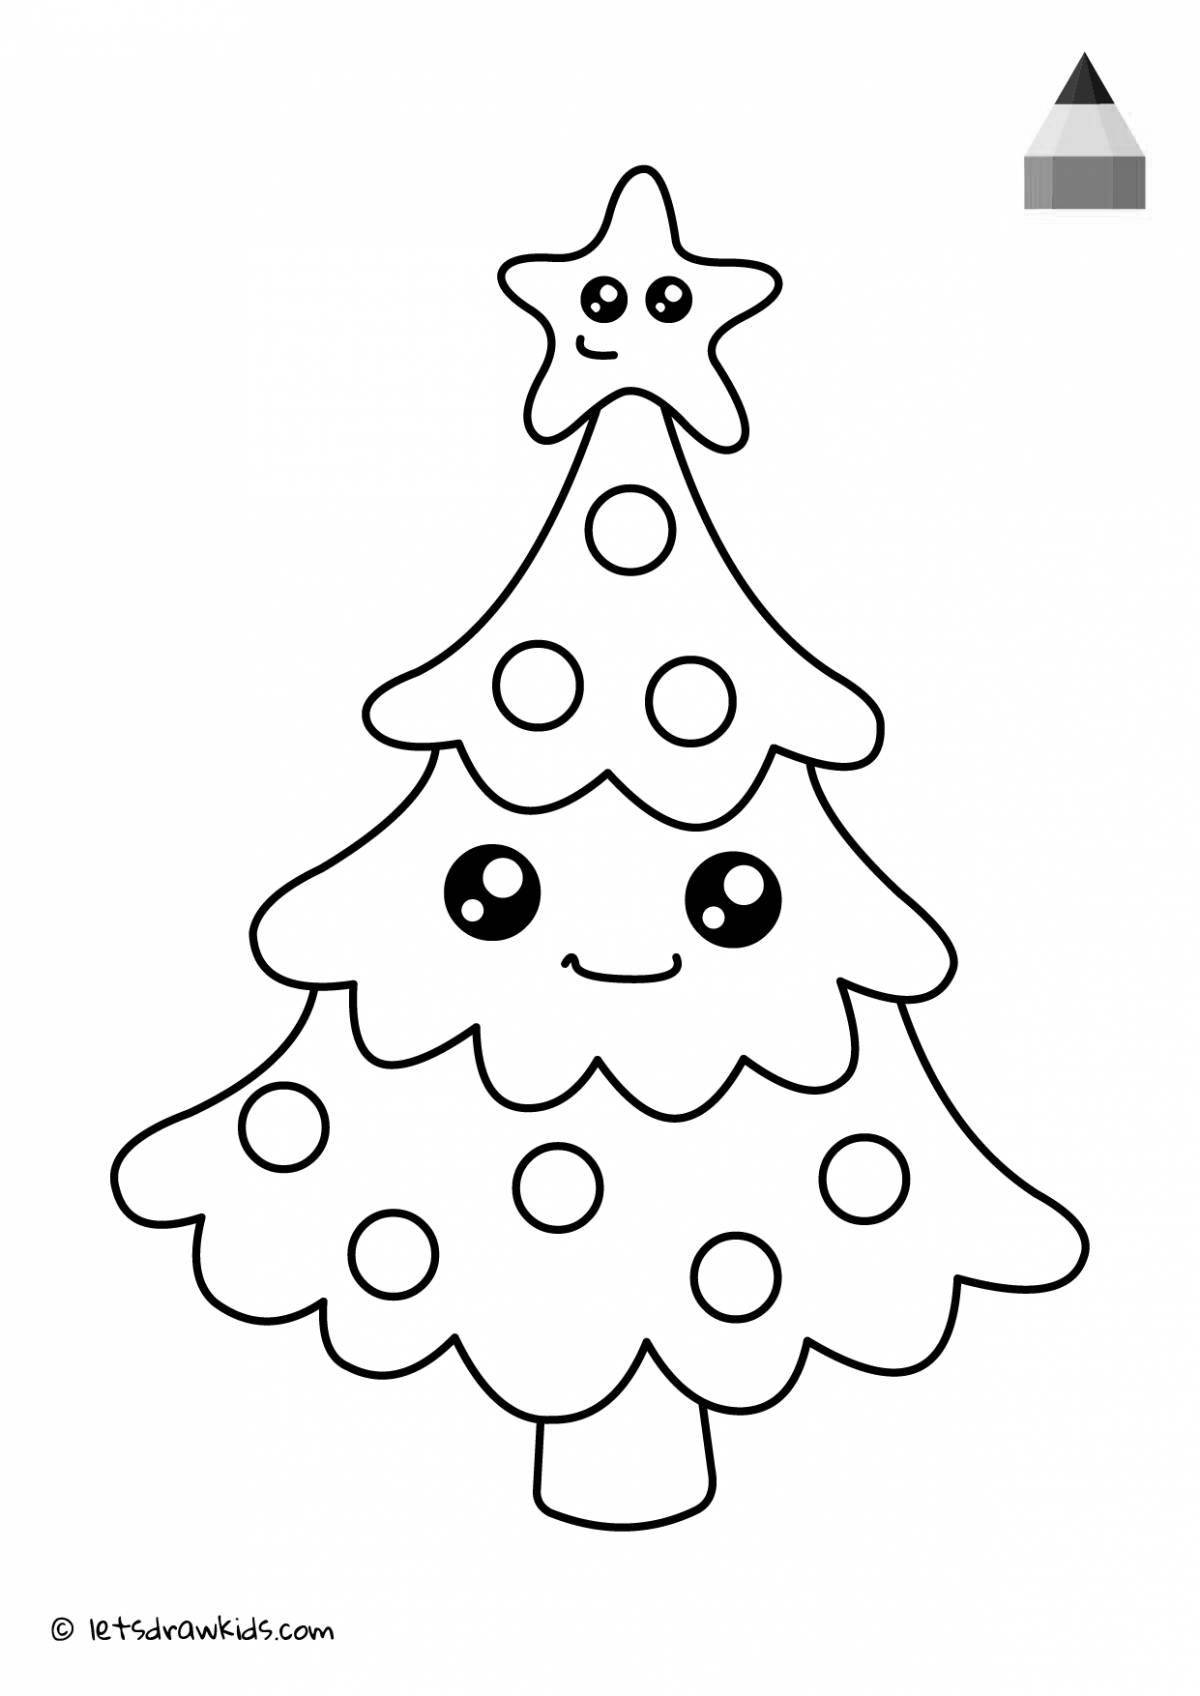 Little tree shining coloring book